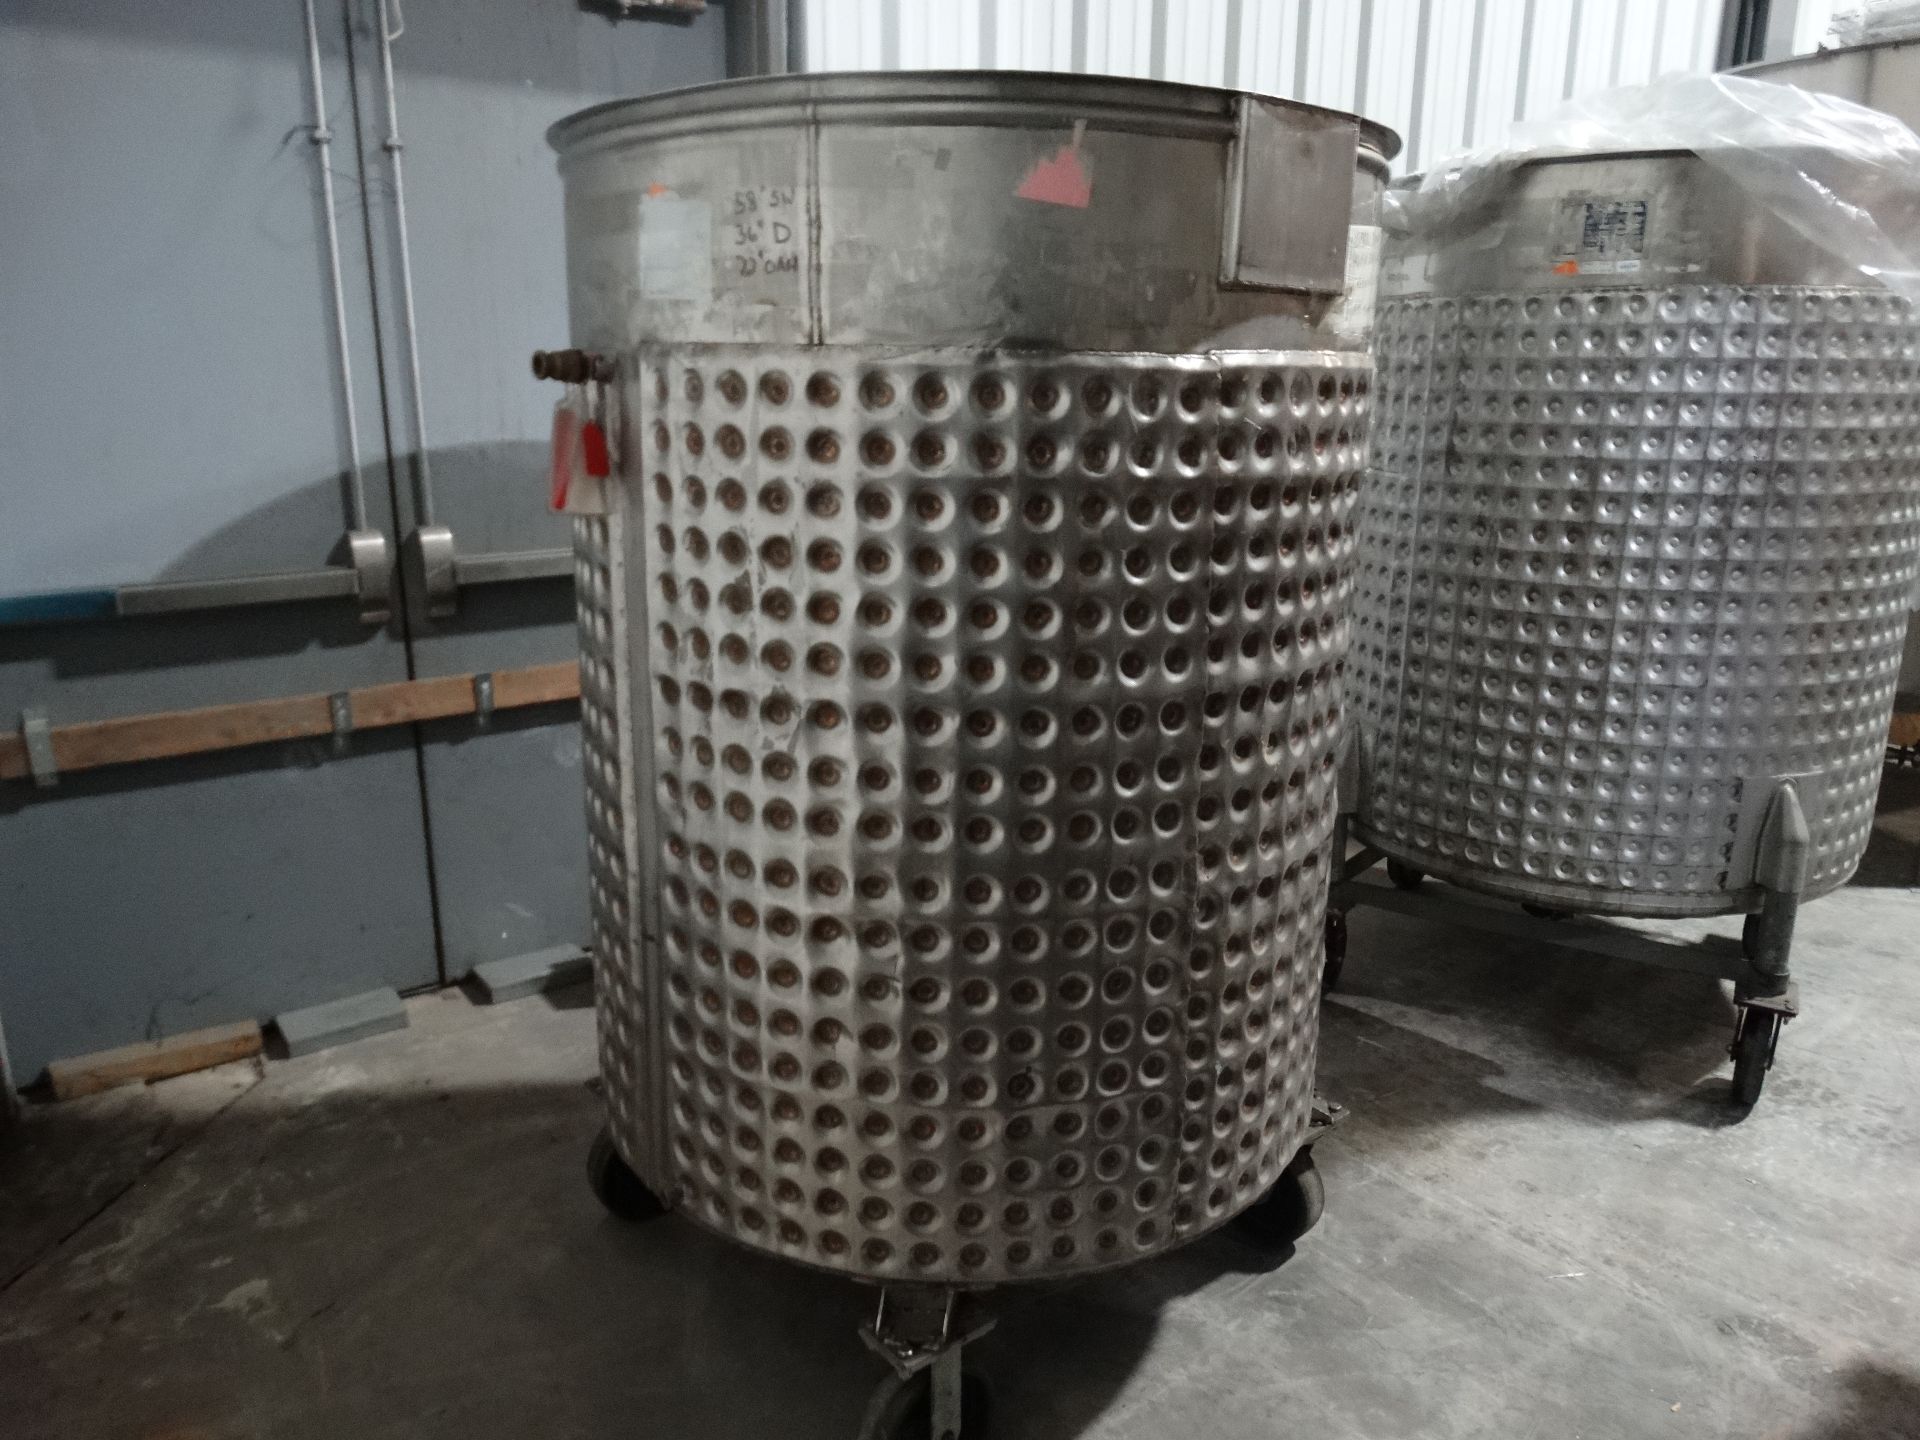 1400 Liter Stainless Steel Dimple Jacketed Tank H6650 - Image 2 of 6